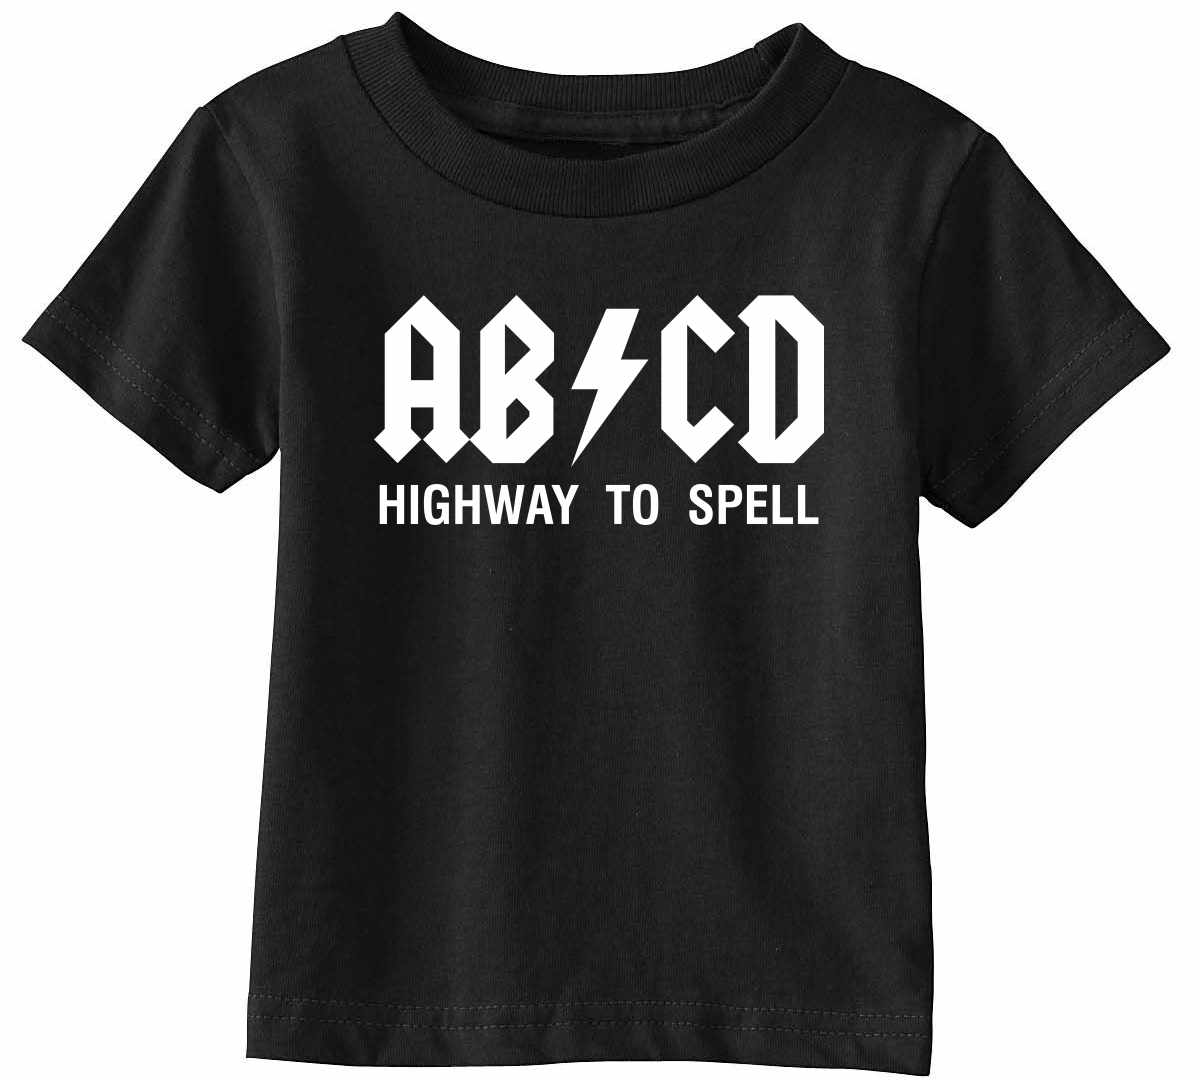 ABCD Highway To Spell on Infant-Toddler T-Shirt